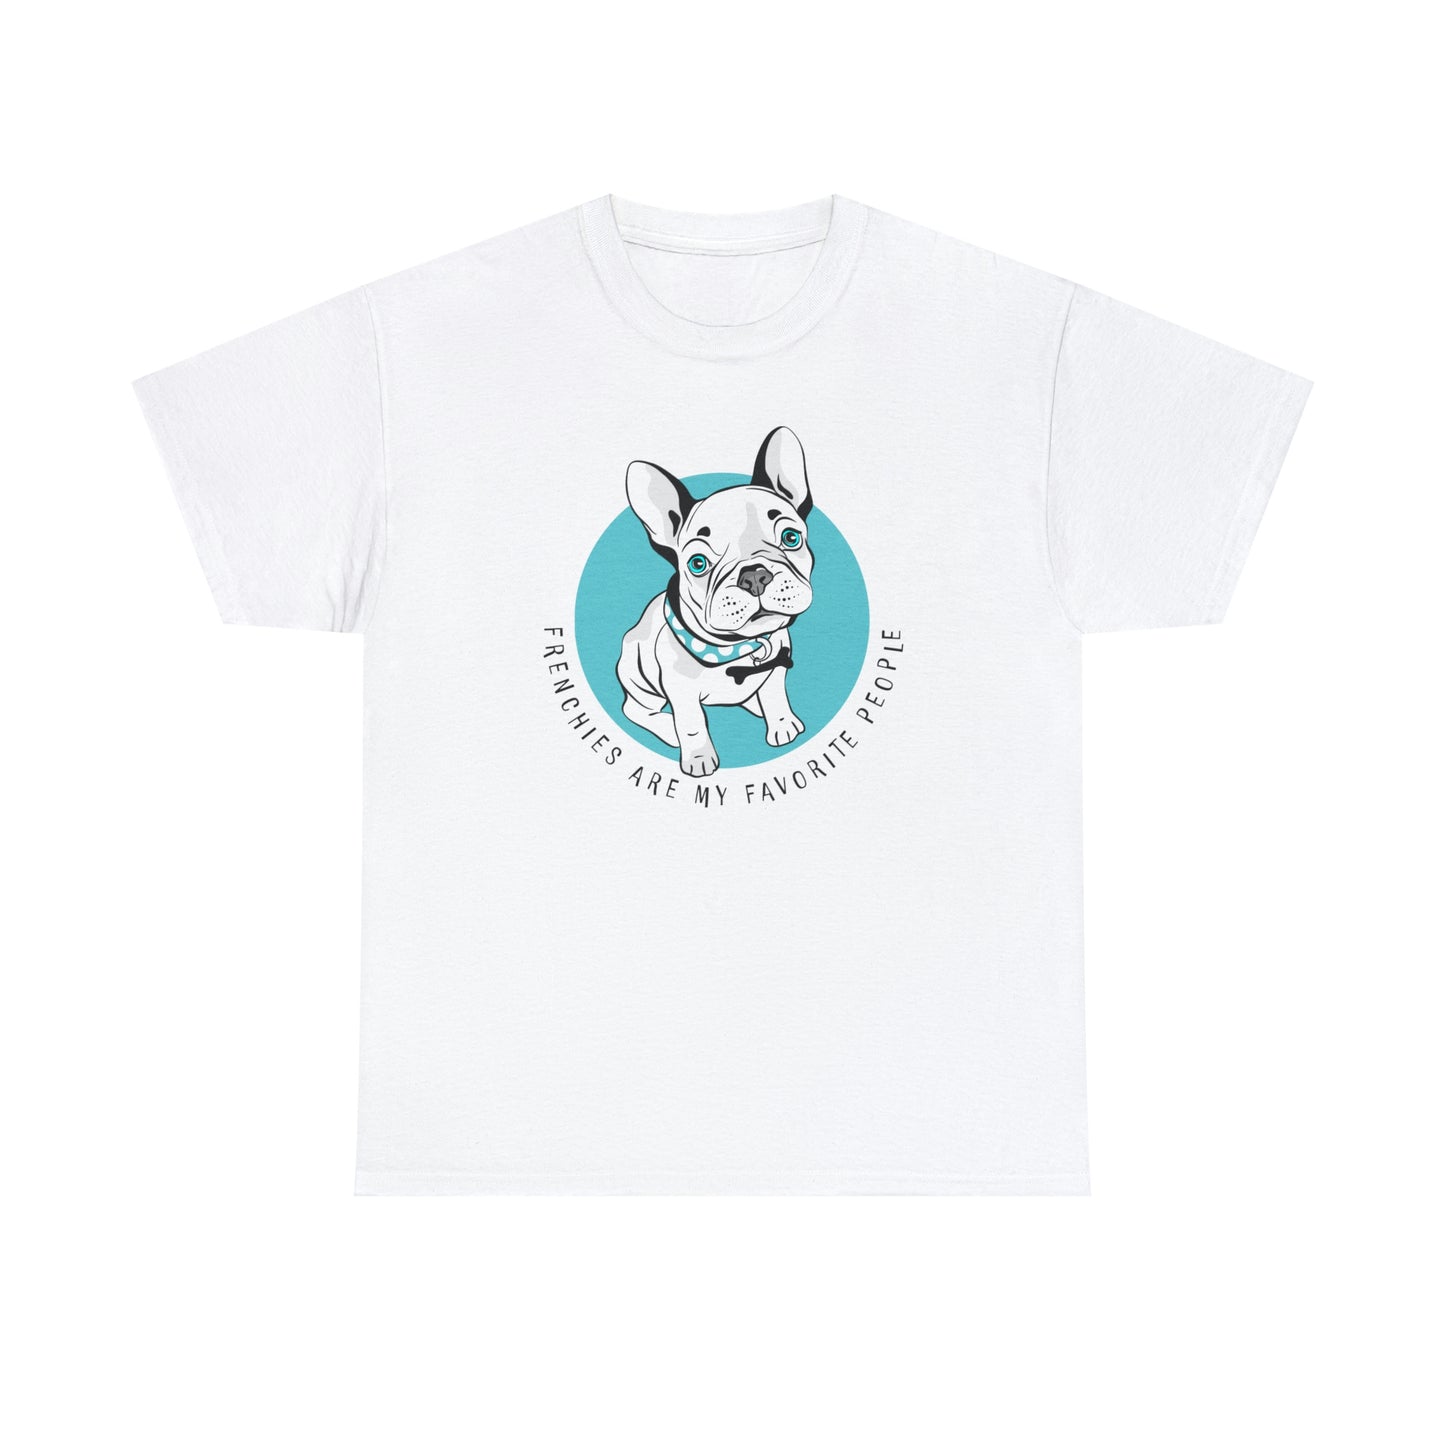 French Bulldog T-Shirt With Cute Frenchie TShirt With Cute Dog T Shirt With Favorite Dog T-Shirt For Frenchie Lover Gift With Frenchies Are My Favorite People TShirt